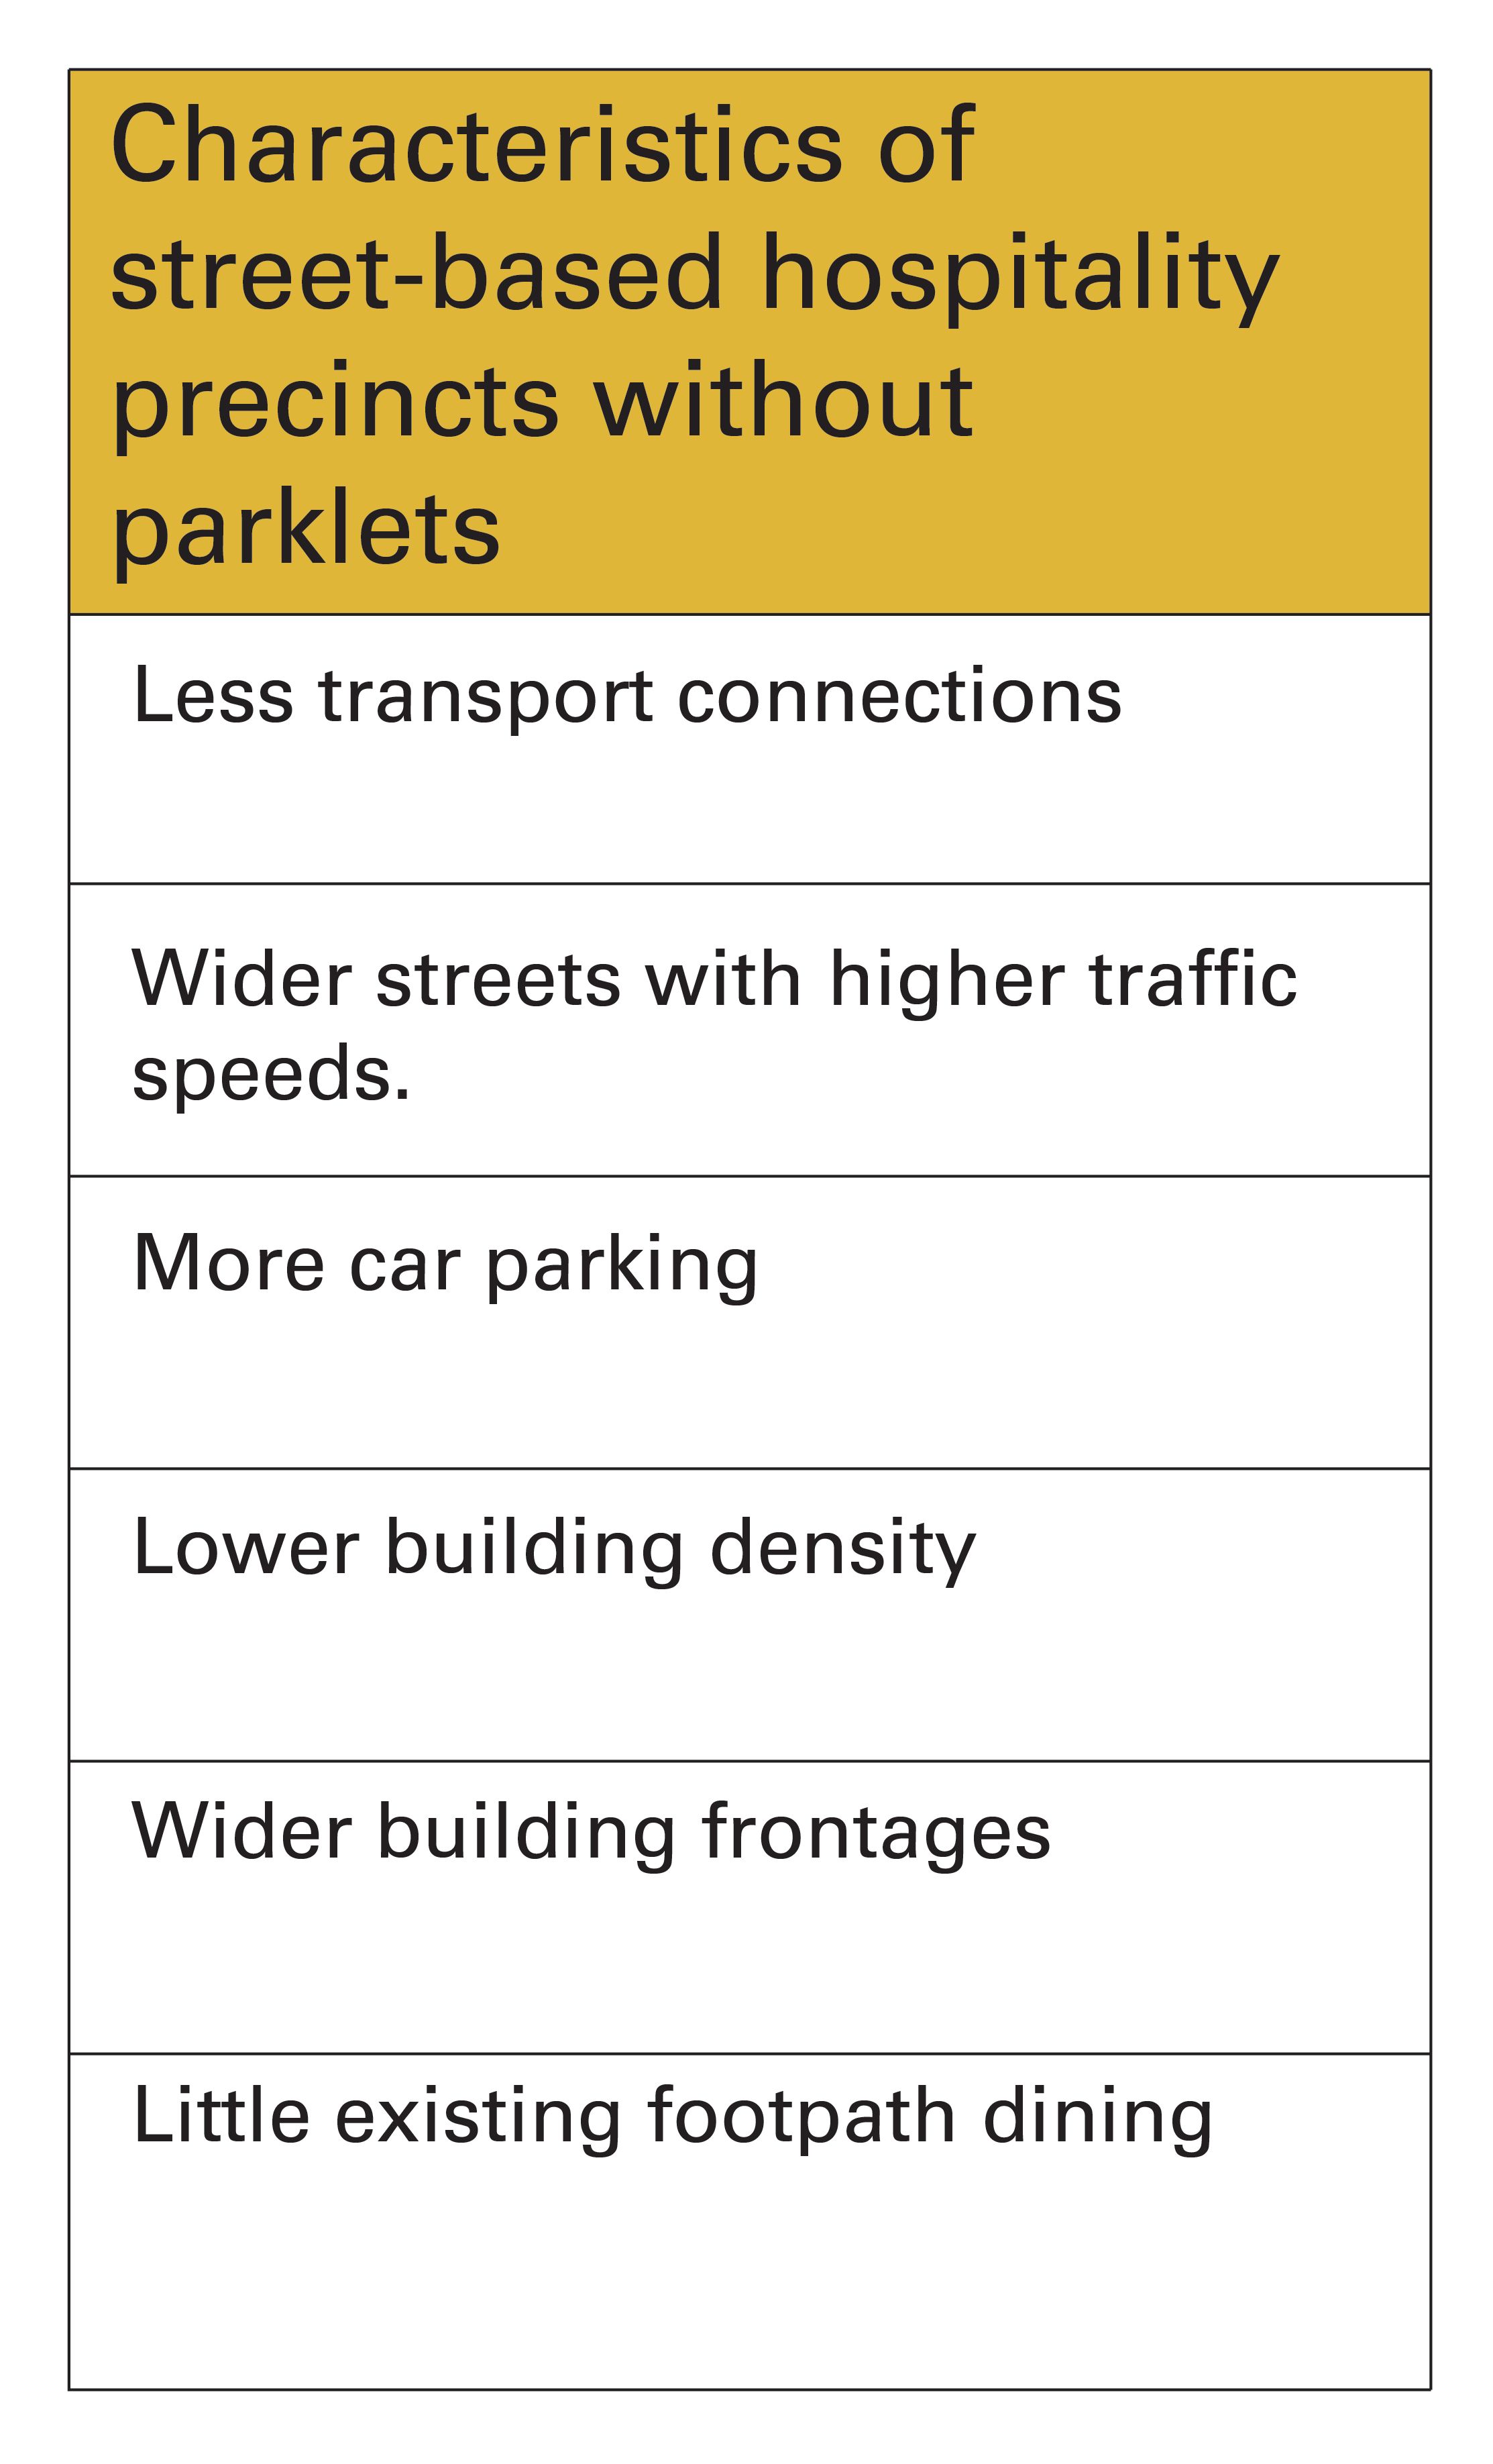 A table with a yellow heading listing the characteristics of street-based hospitality precincts without parklets